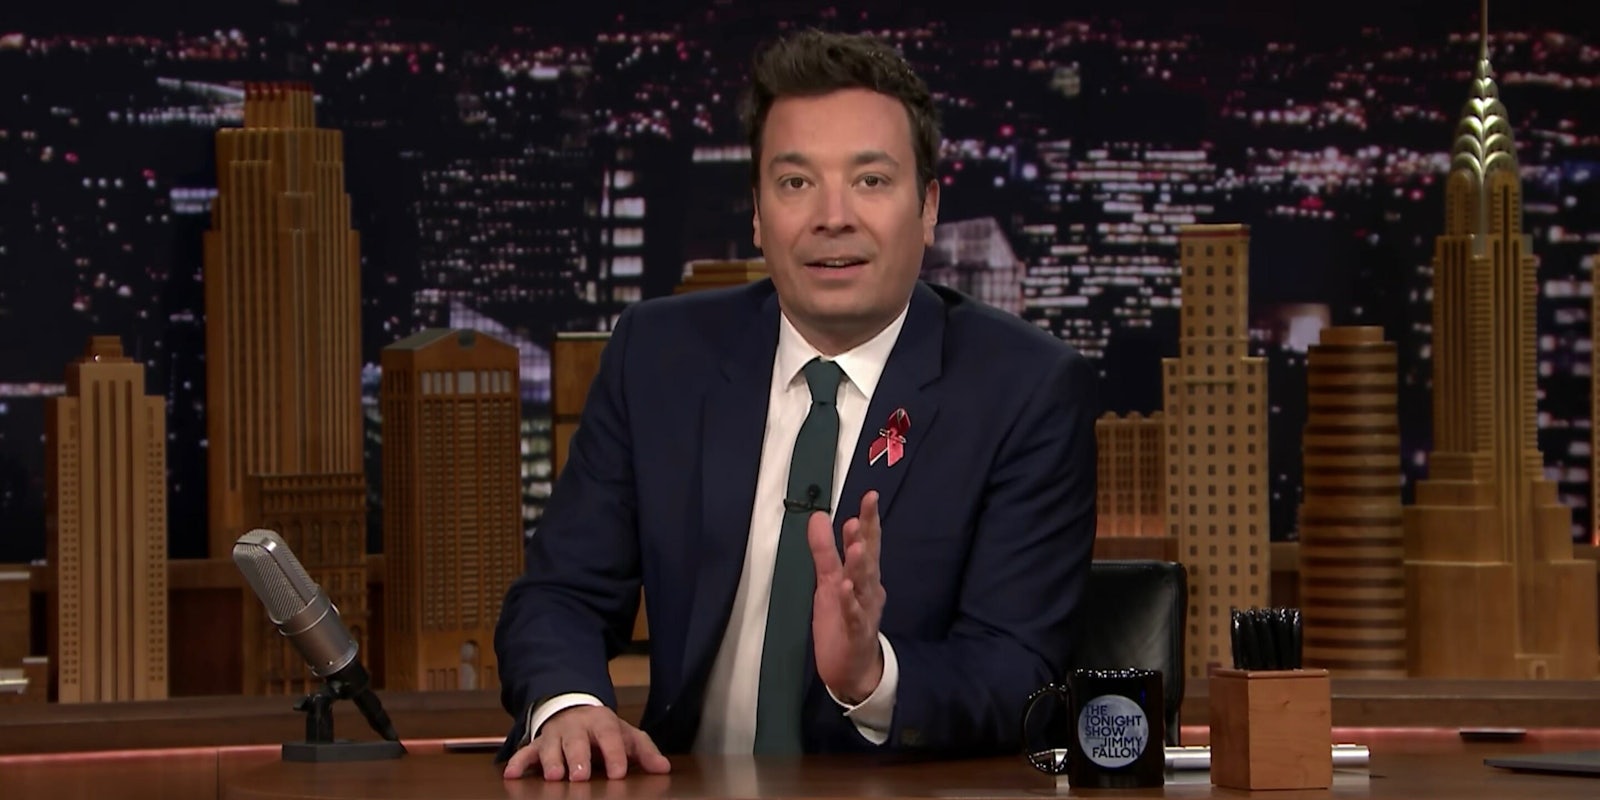 Jimmy Fallon makes emotional pledge to join students in march for gun control